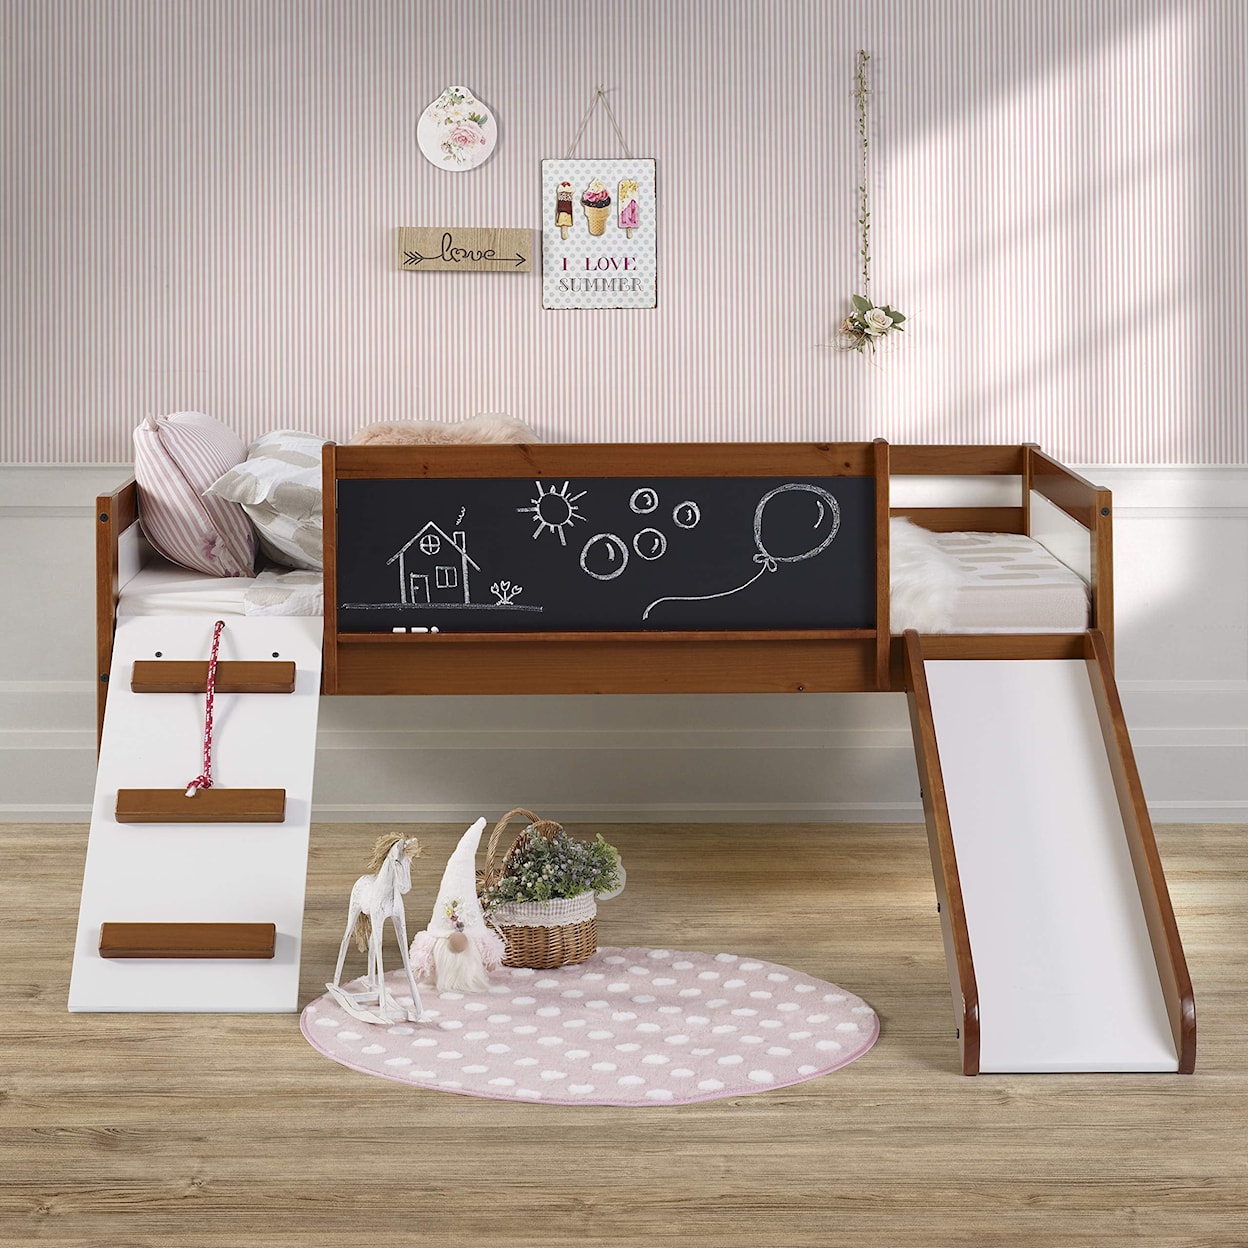 Donco Trading Co Bunkbeds ESPRESSO TWIN LOFT BED WITH SLIDE |